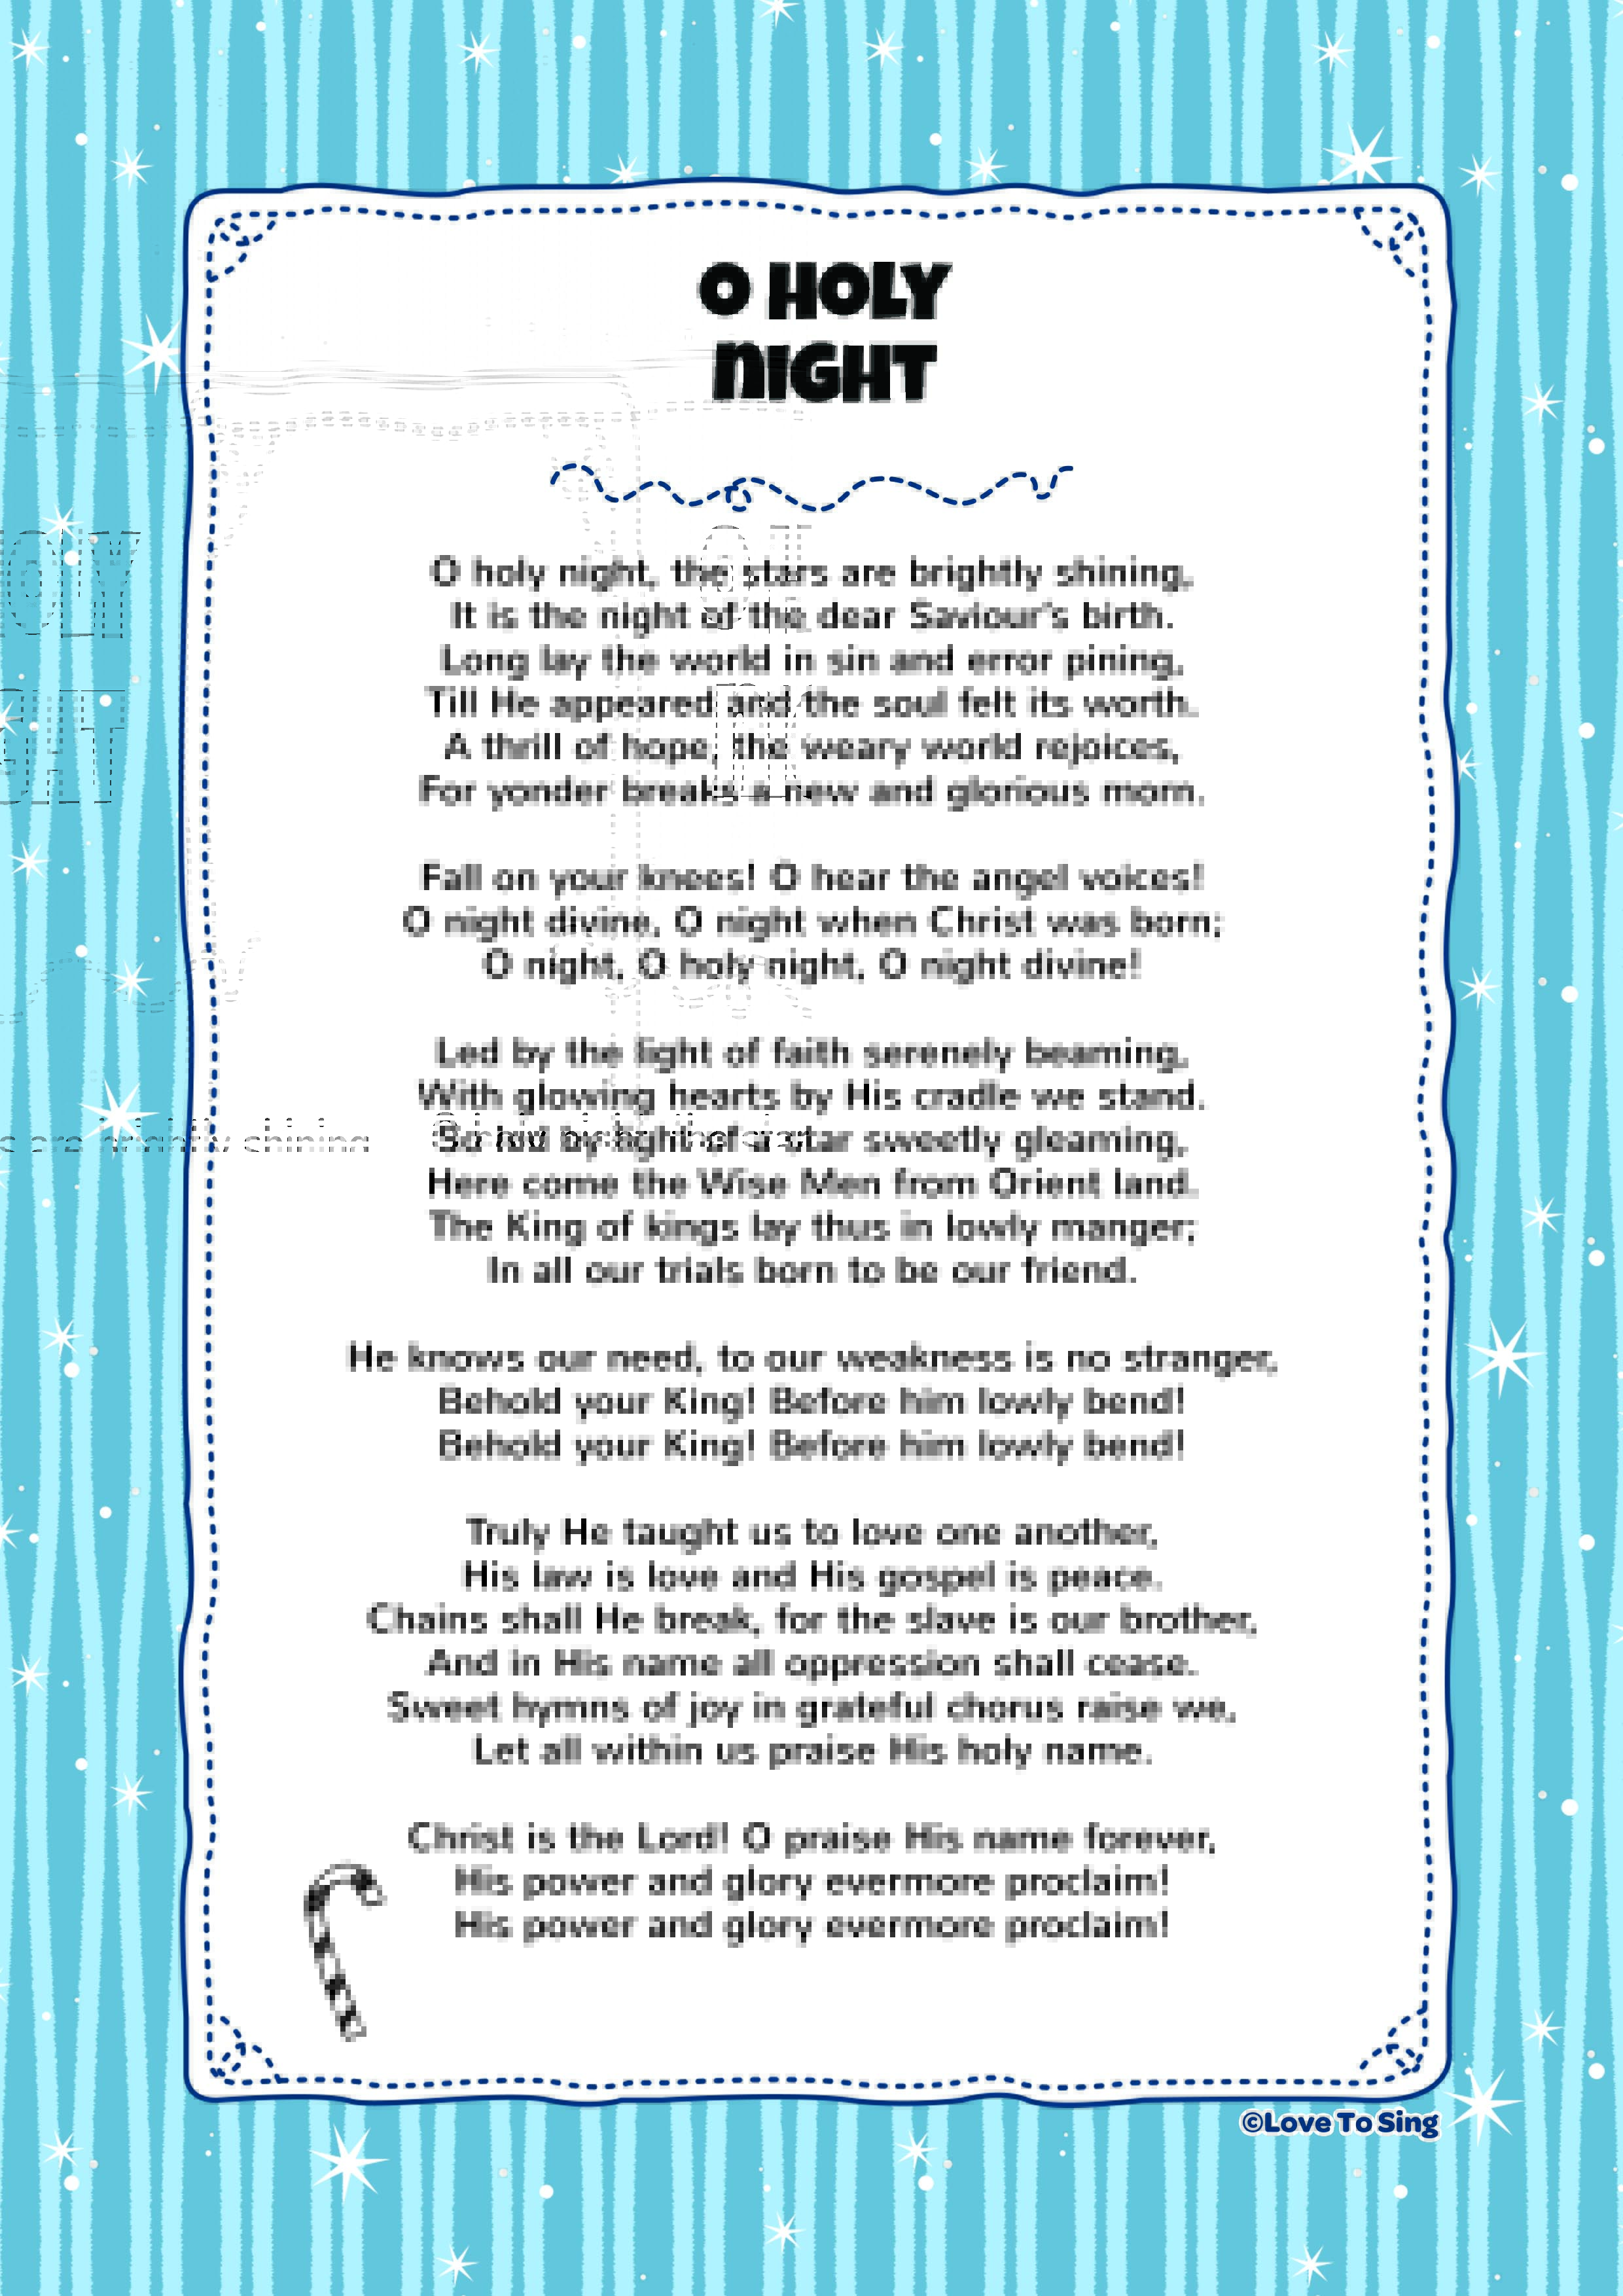 O Holy Night Kids Video Song with FREE Lyrics & Activities!